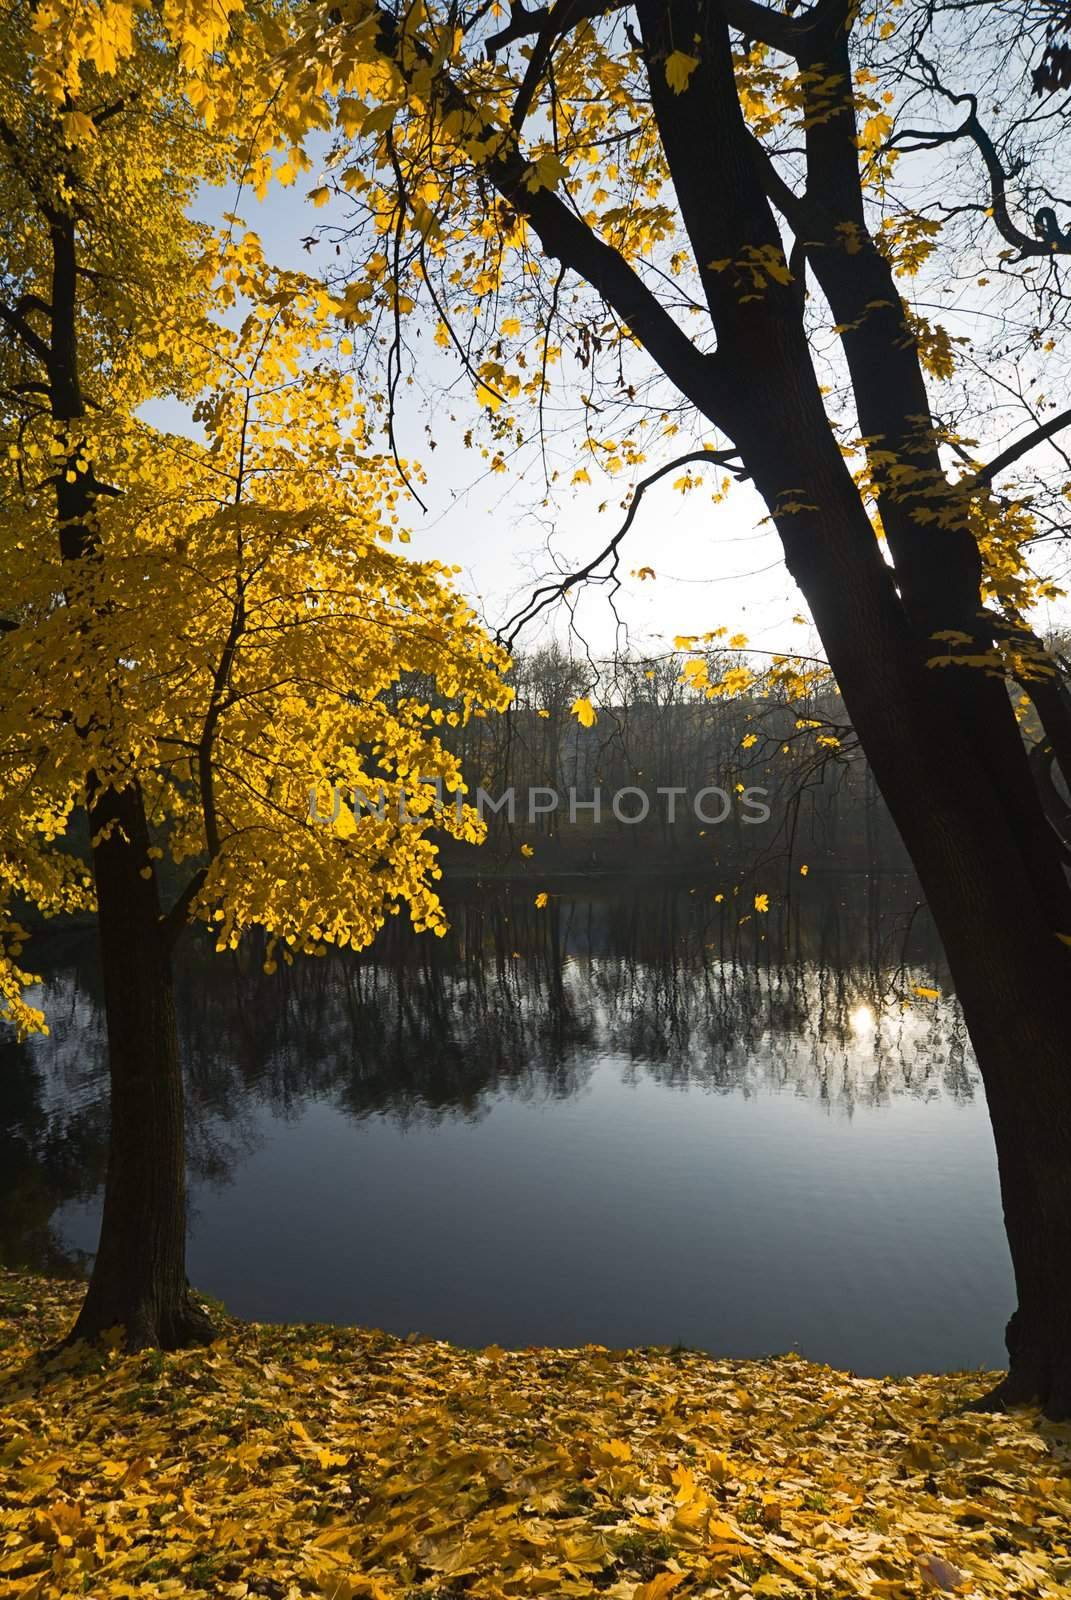 Tree with yellow leaves on the bank of a lake